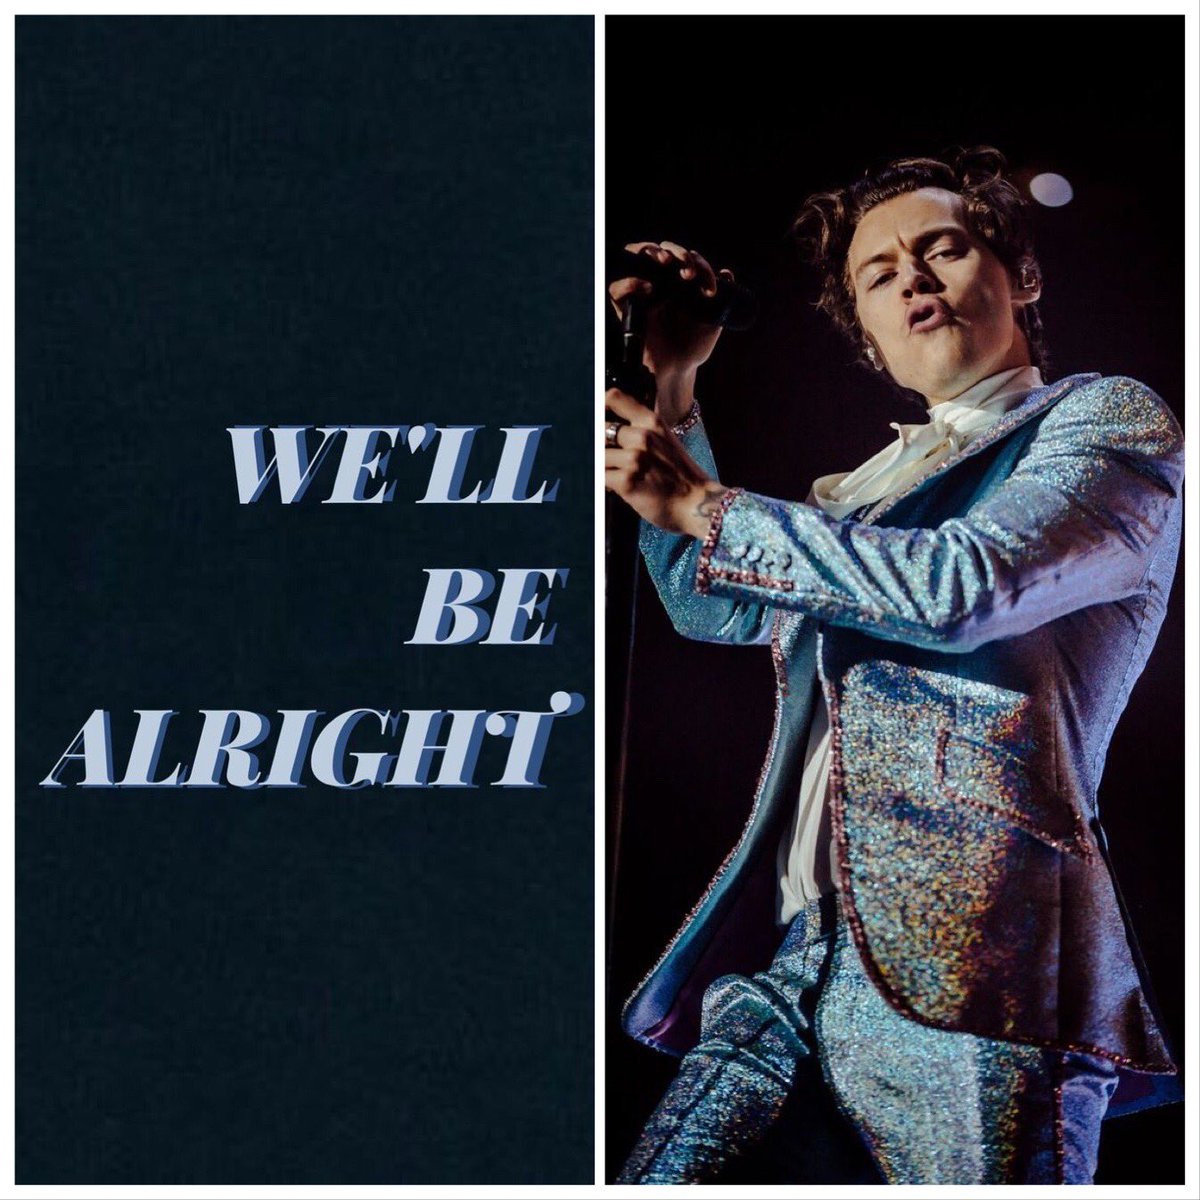 Harry styles lyrics as his outfits; a short but pleasing thread: